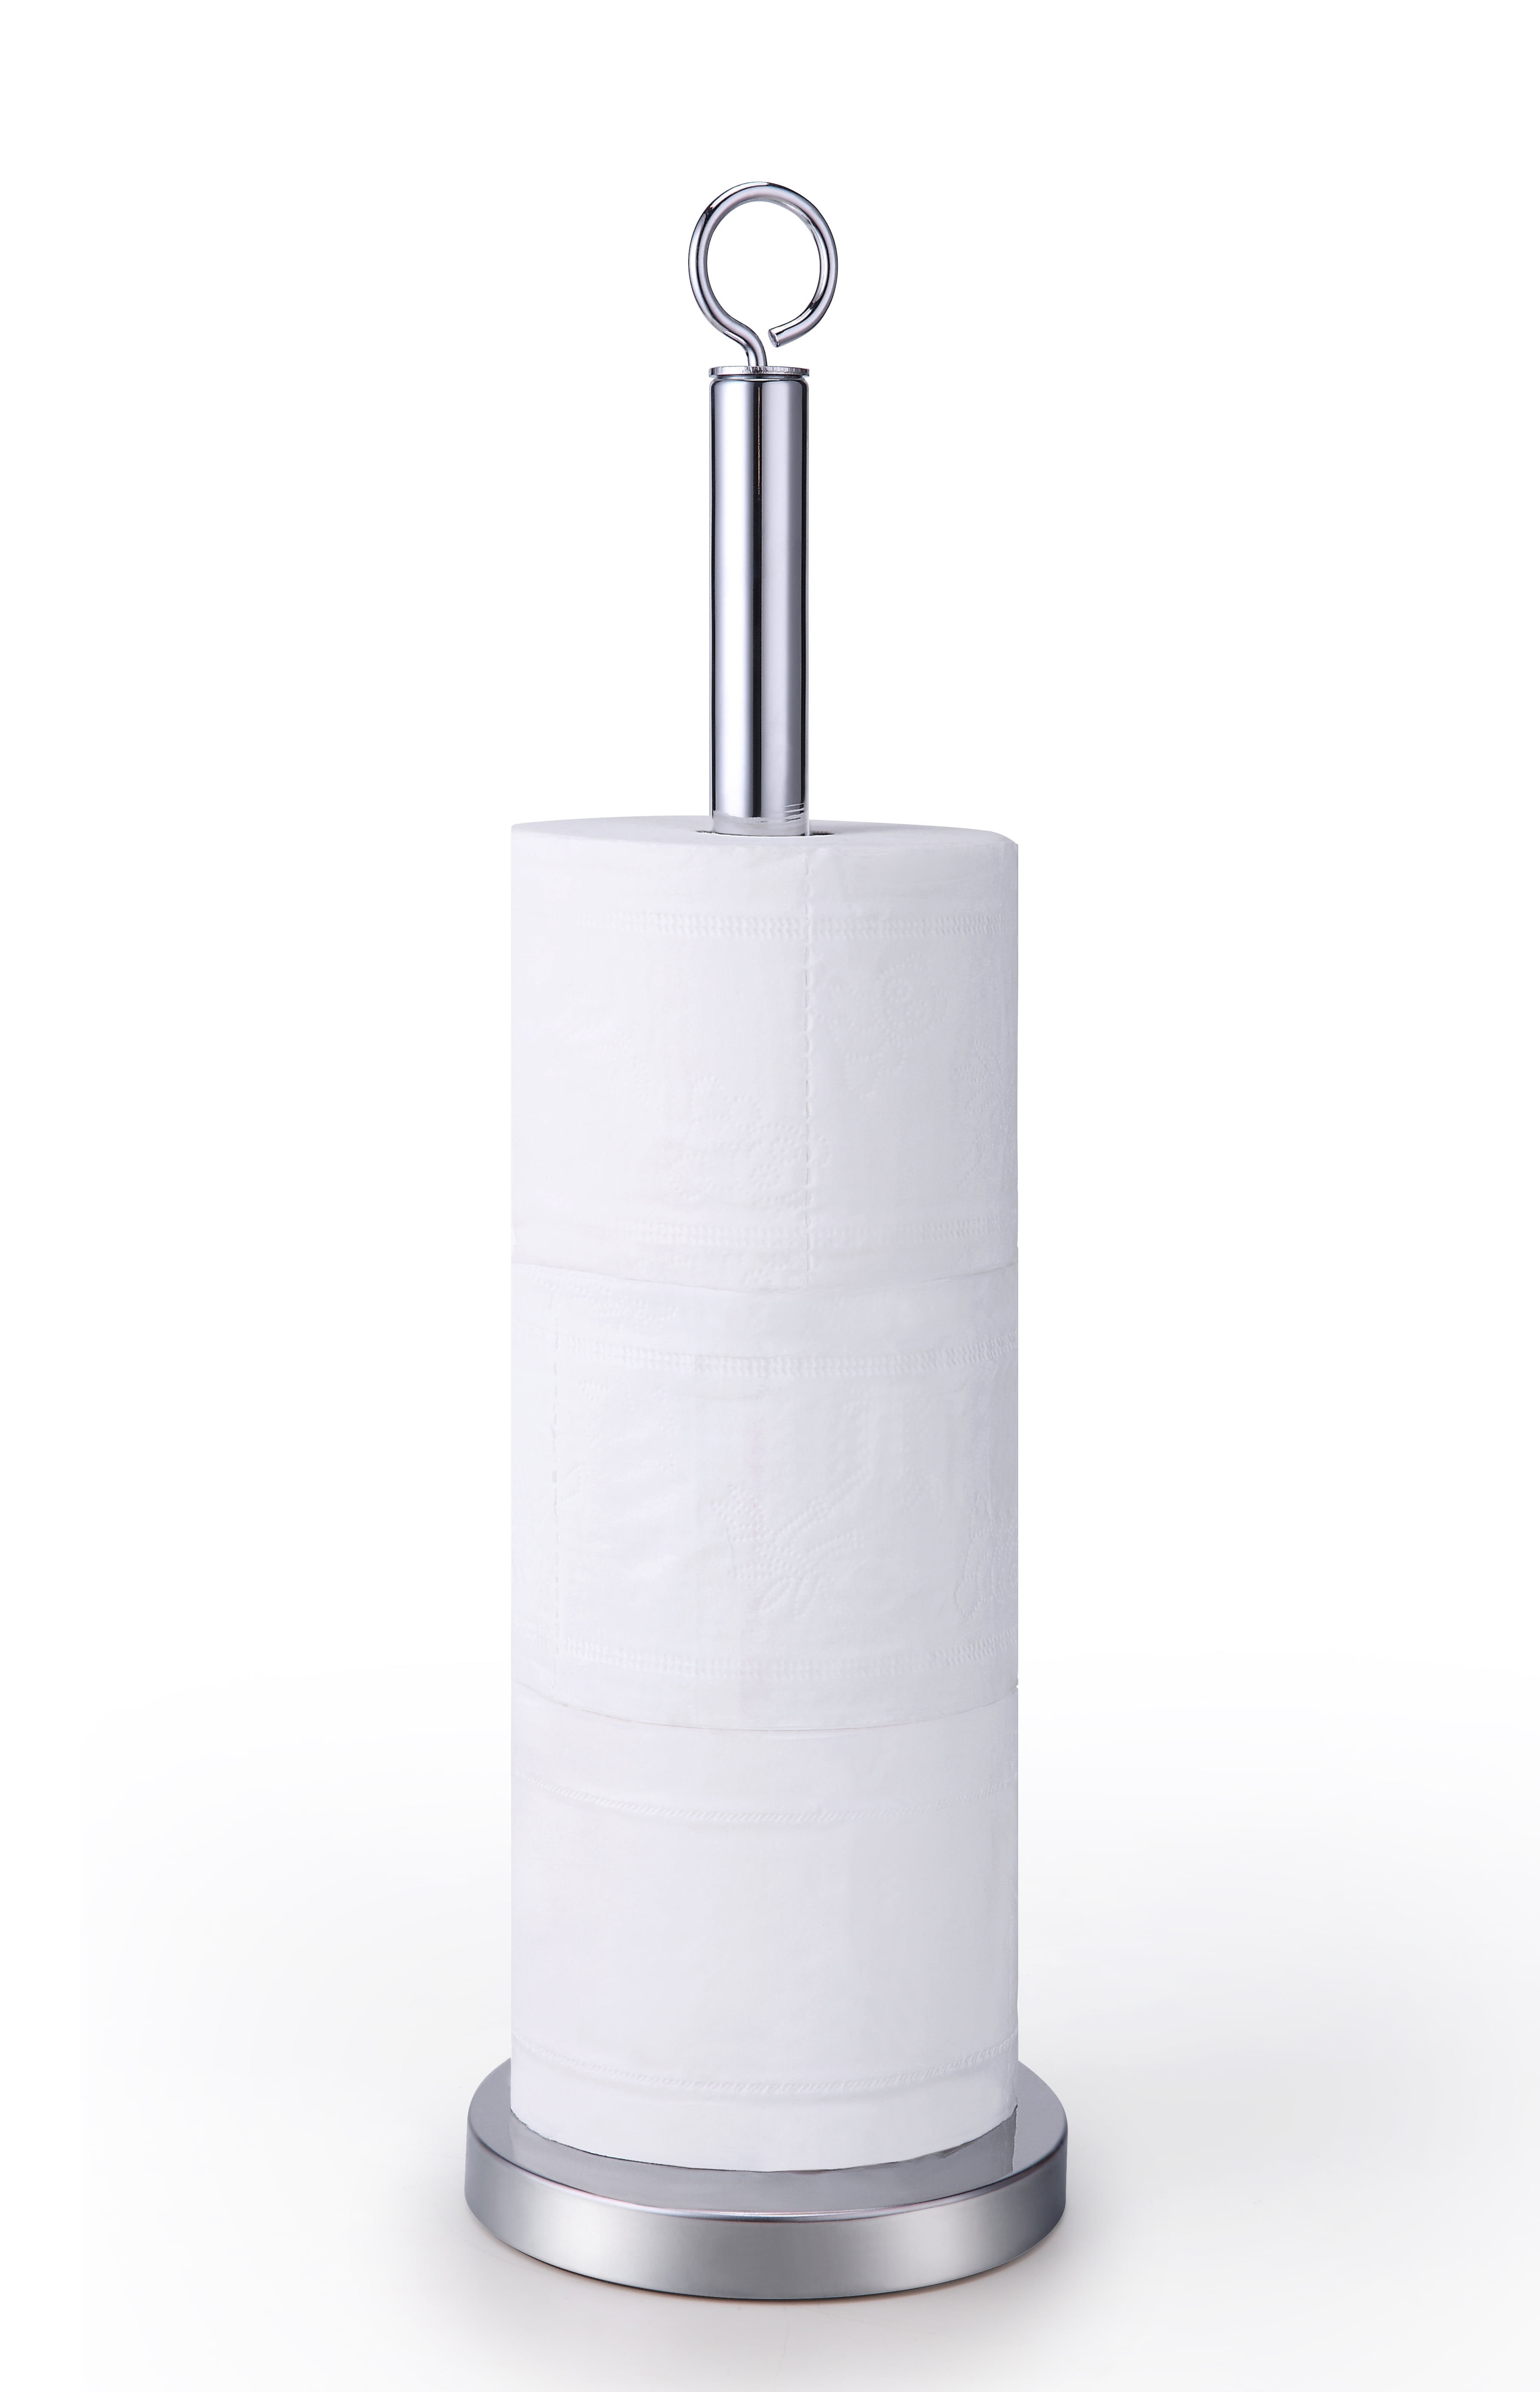 HEWI Stainless Steel Vertical Spare Toilet Tissue Roll Holder - 900.21.006